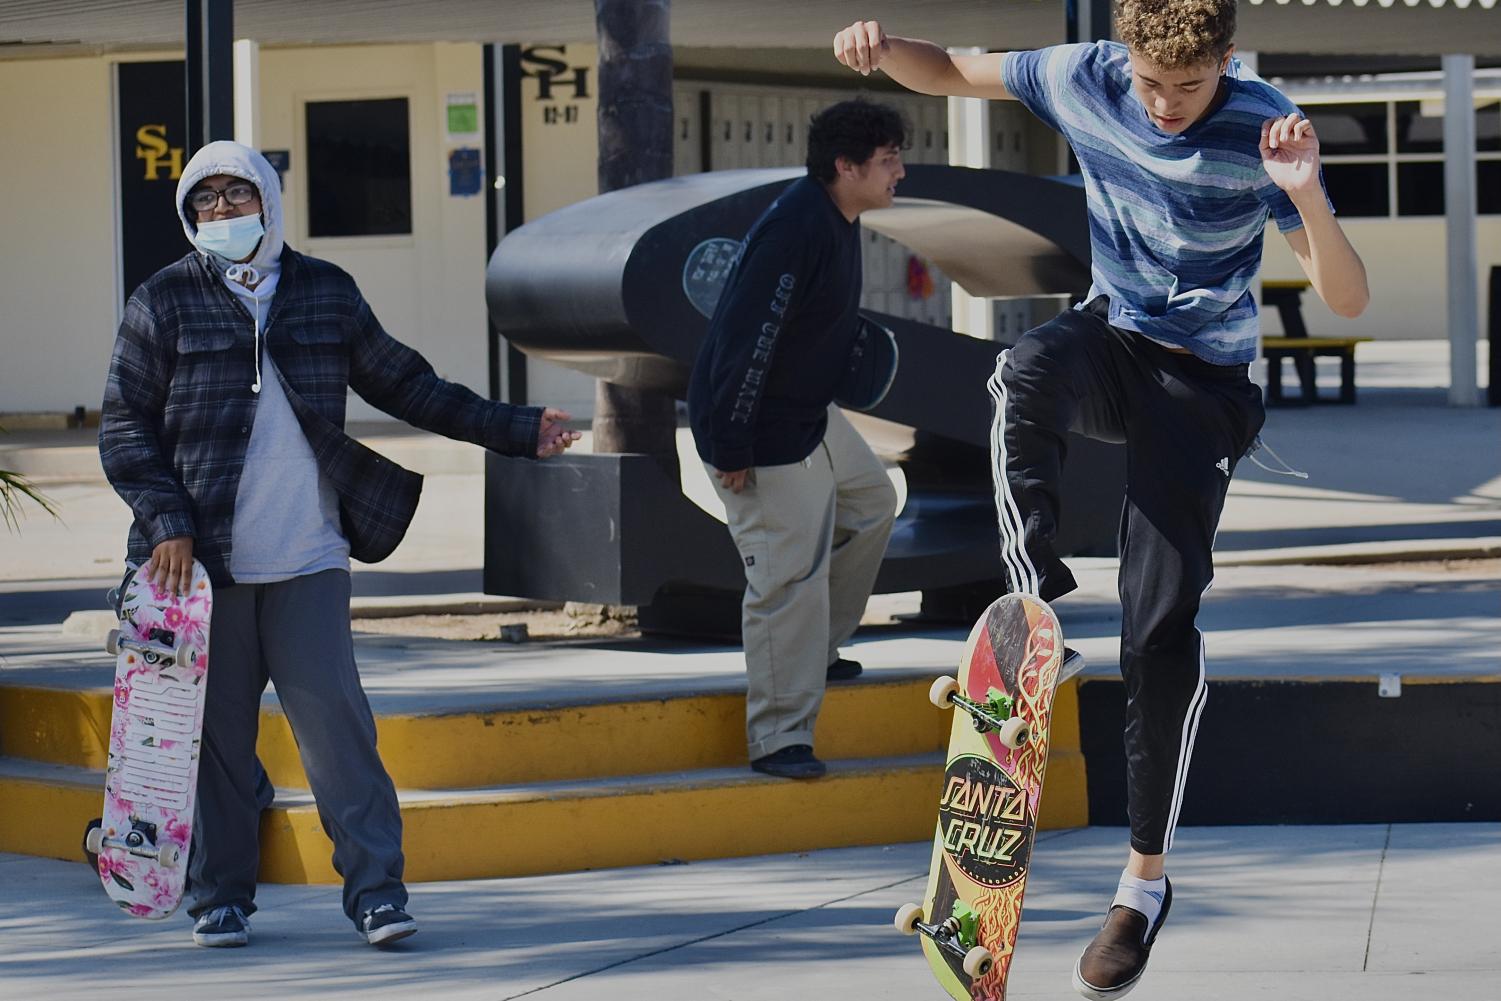 Why Do Skaters Wear Baggy Clothing?